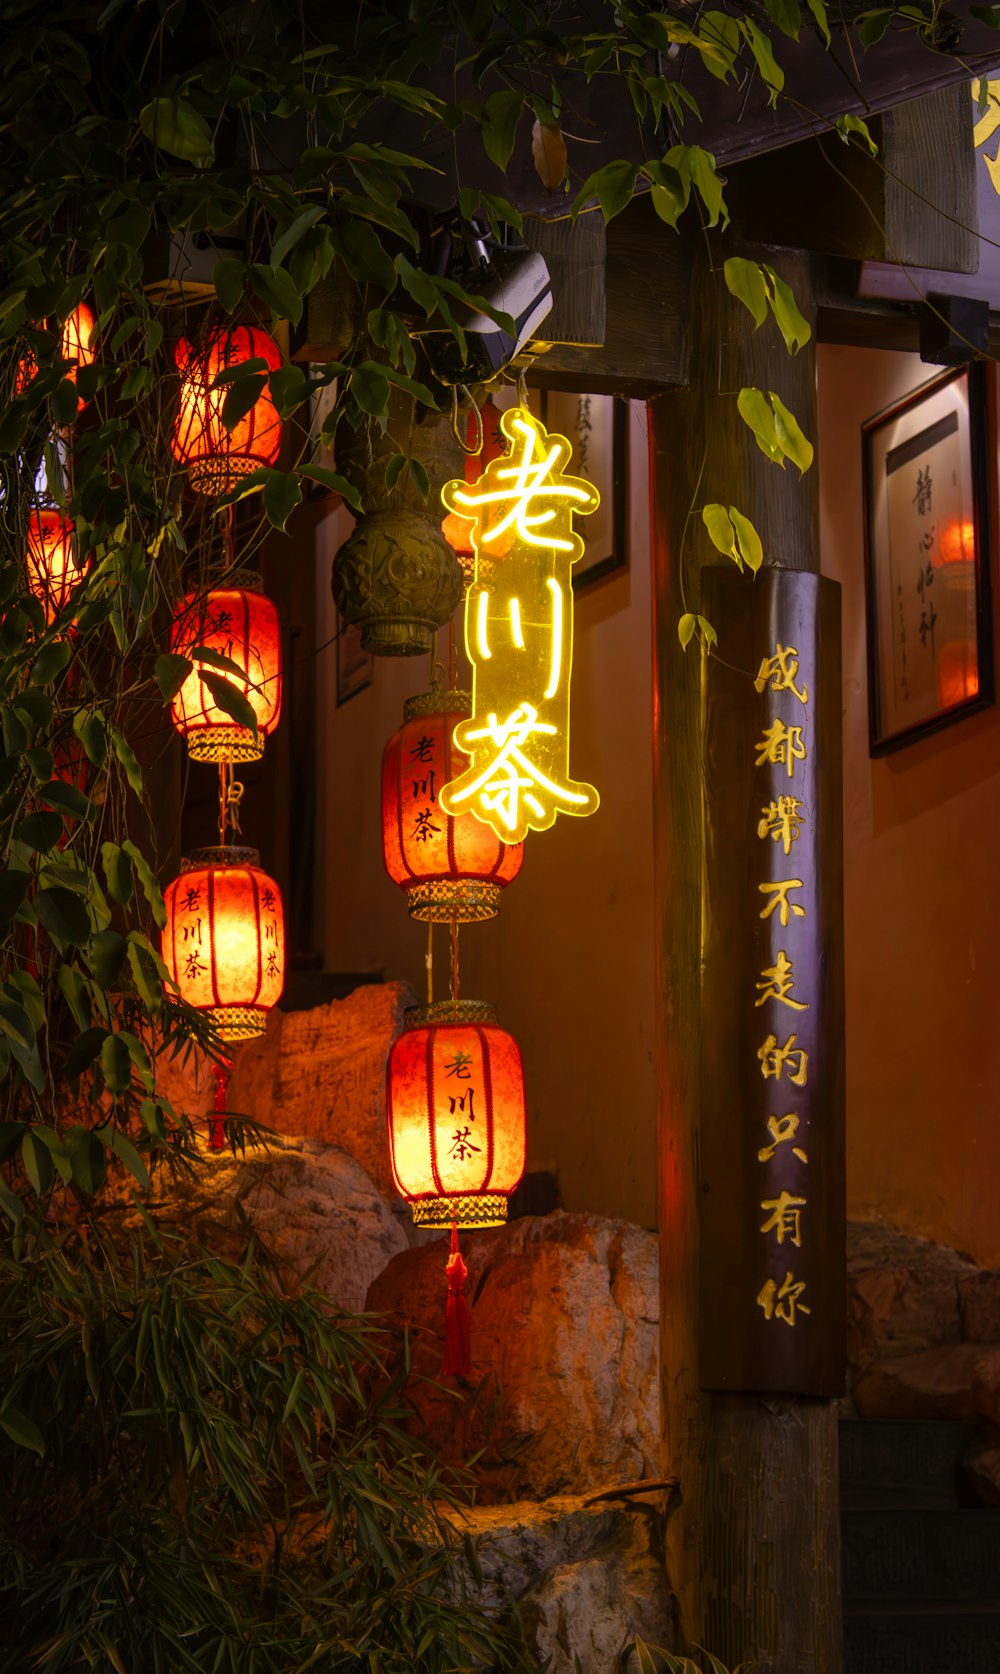 a number of lanterns with chinese writing on them